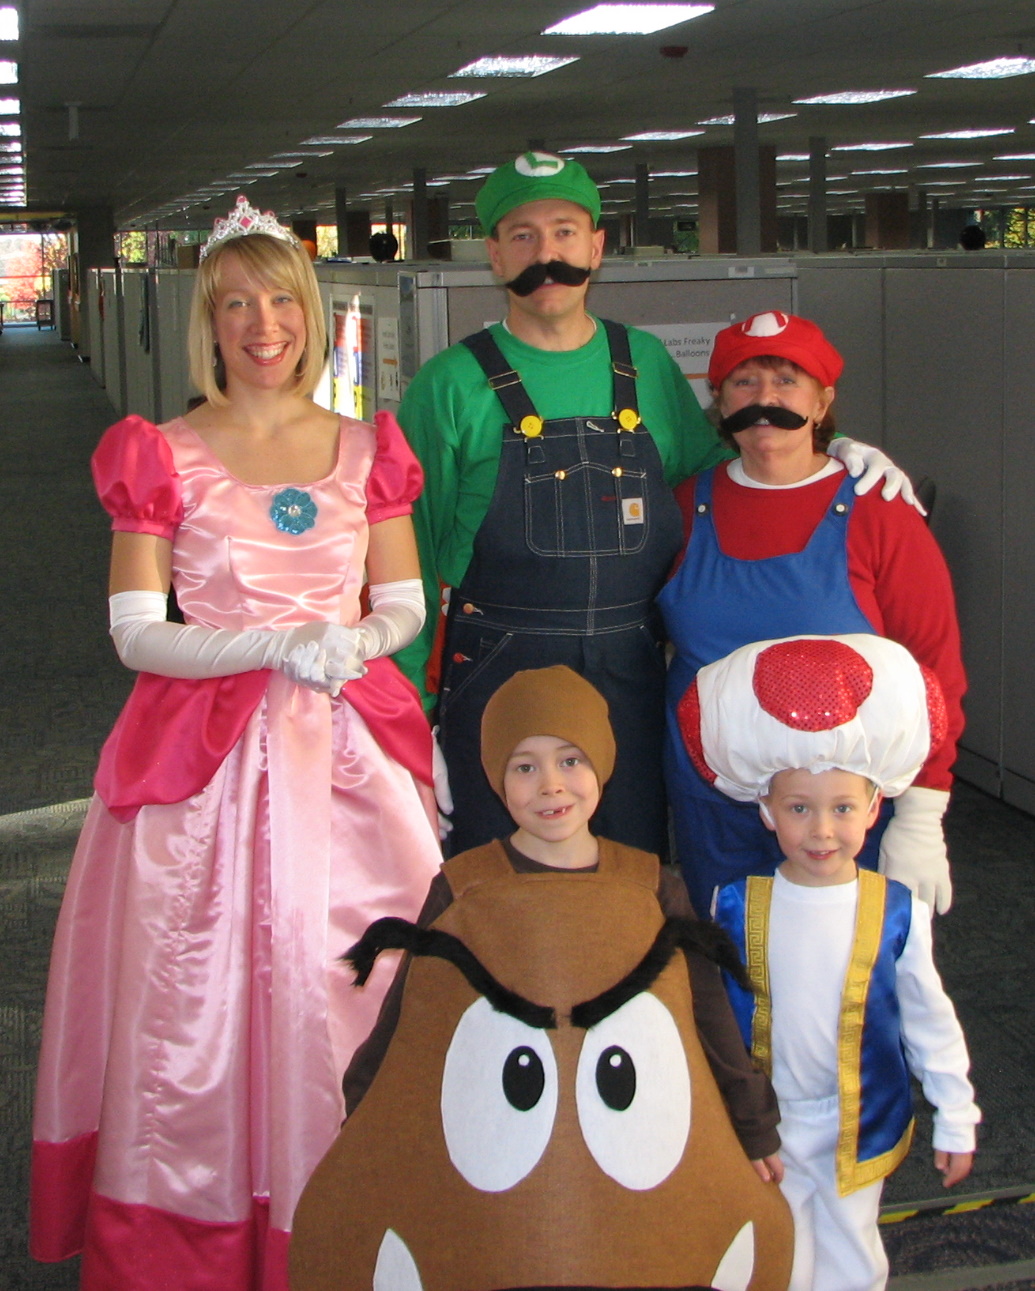 Super Brothers Costume Family Matching Adult & Kids Cosplay Costume Mario  Brothers Halloween Cosplay Costume